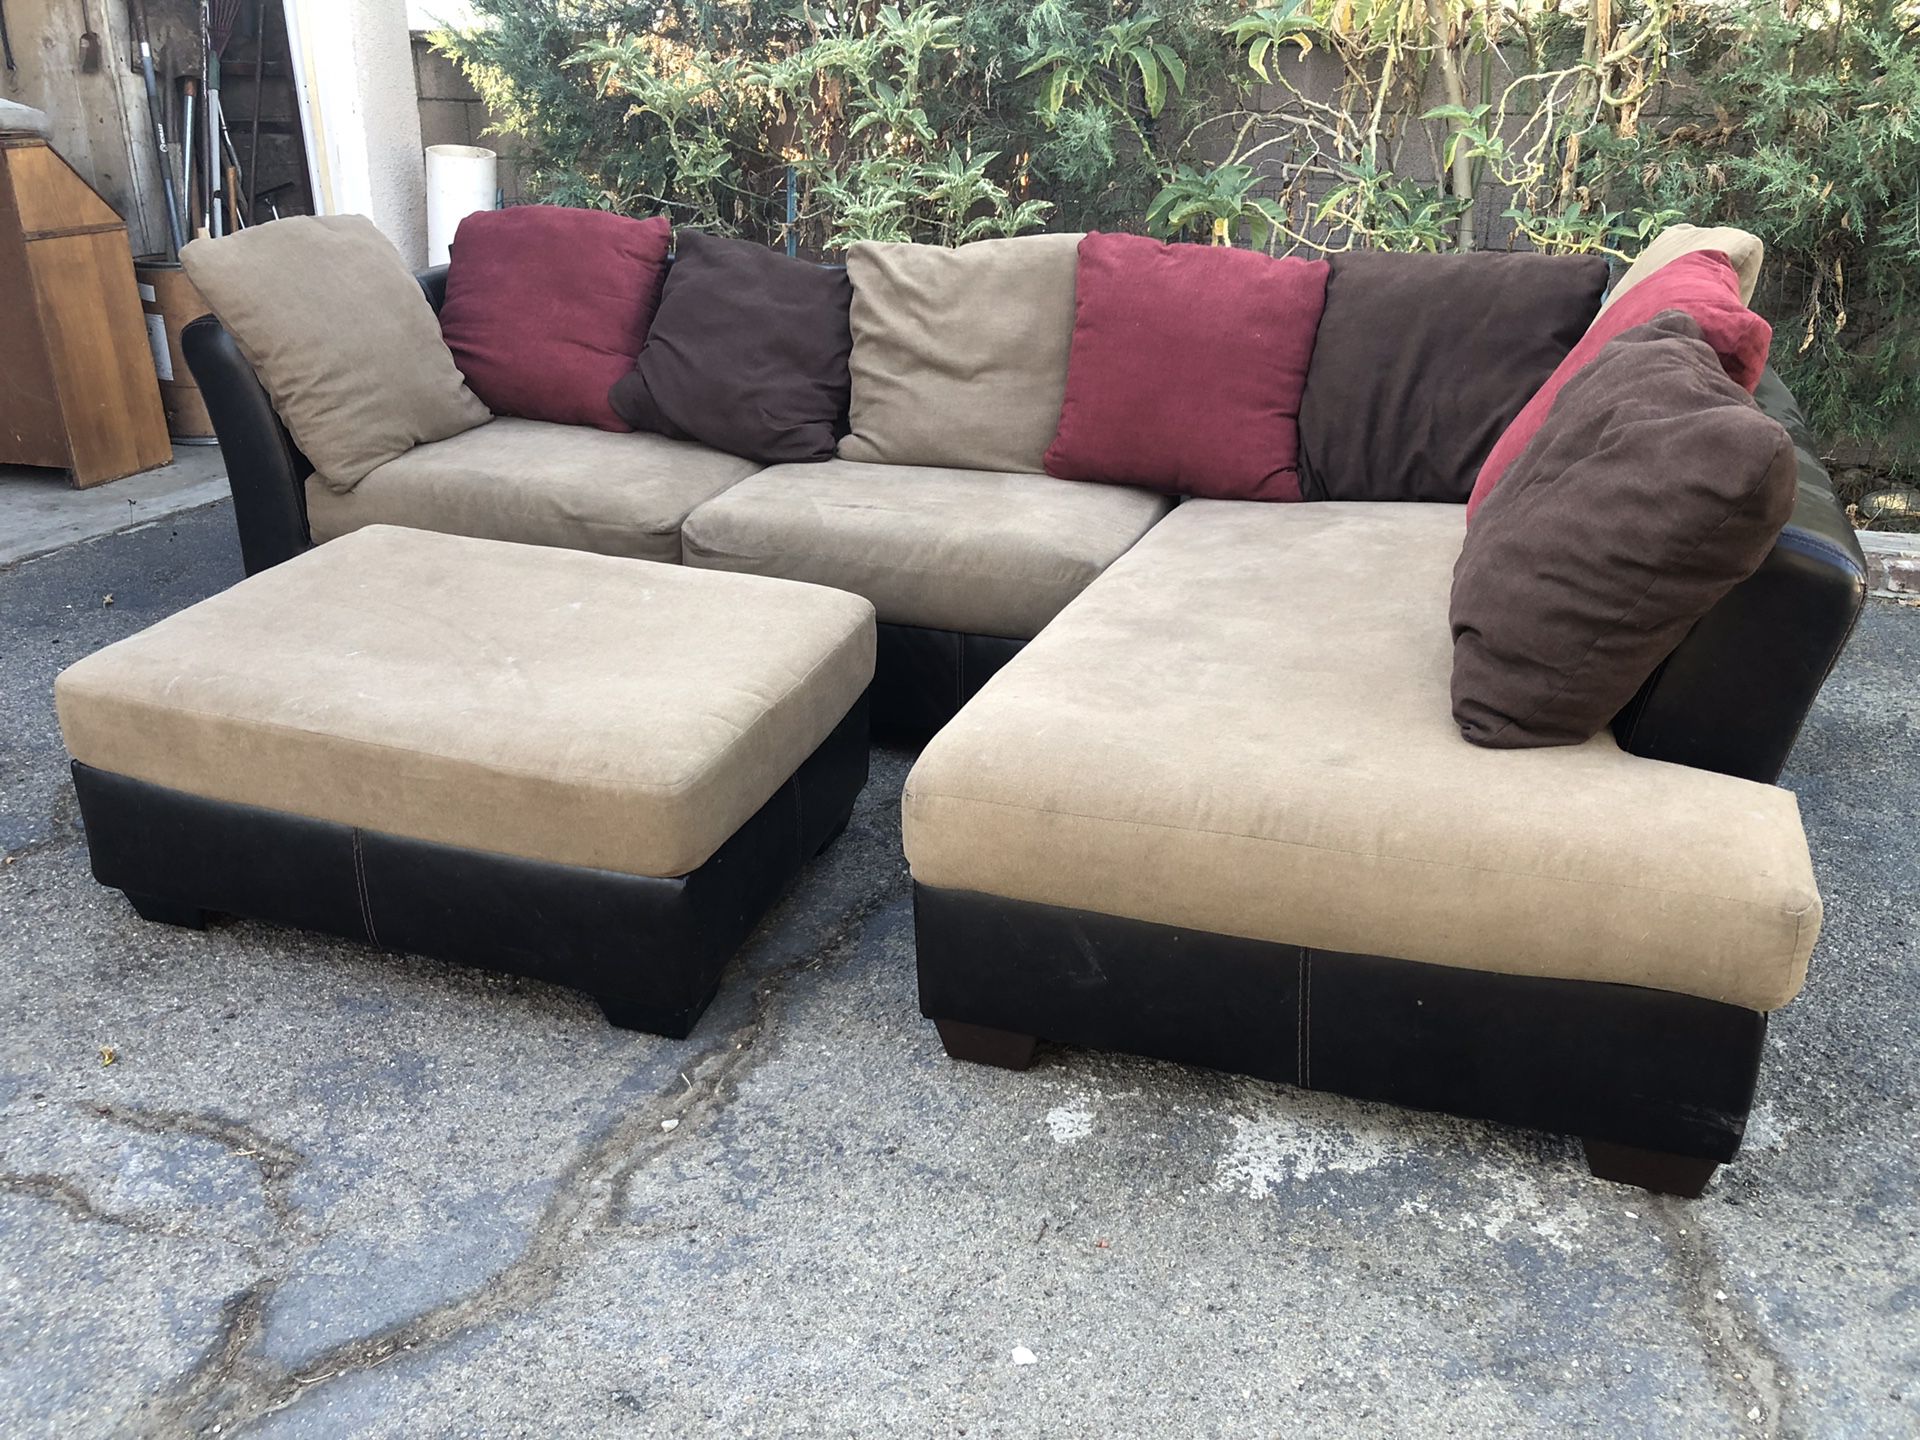 Ashley’s brown sectional couch with ottoman